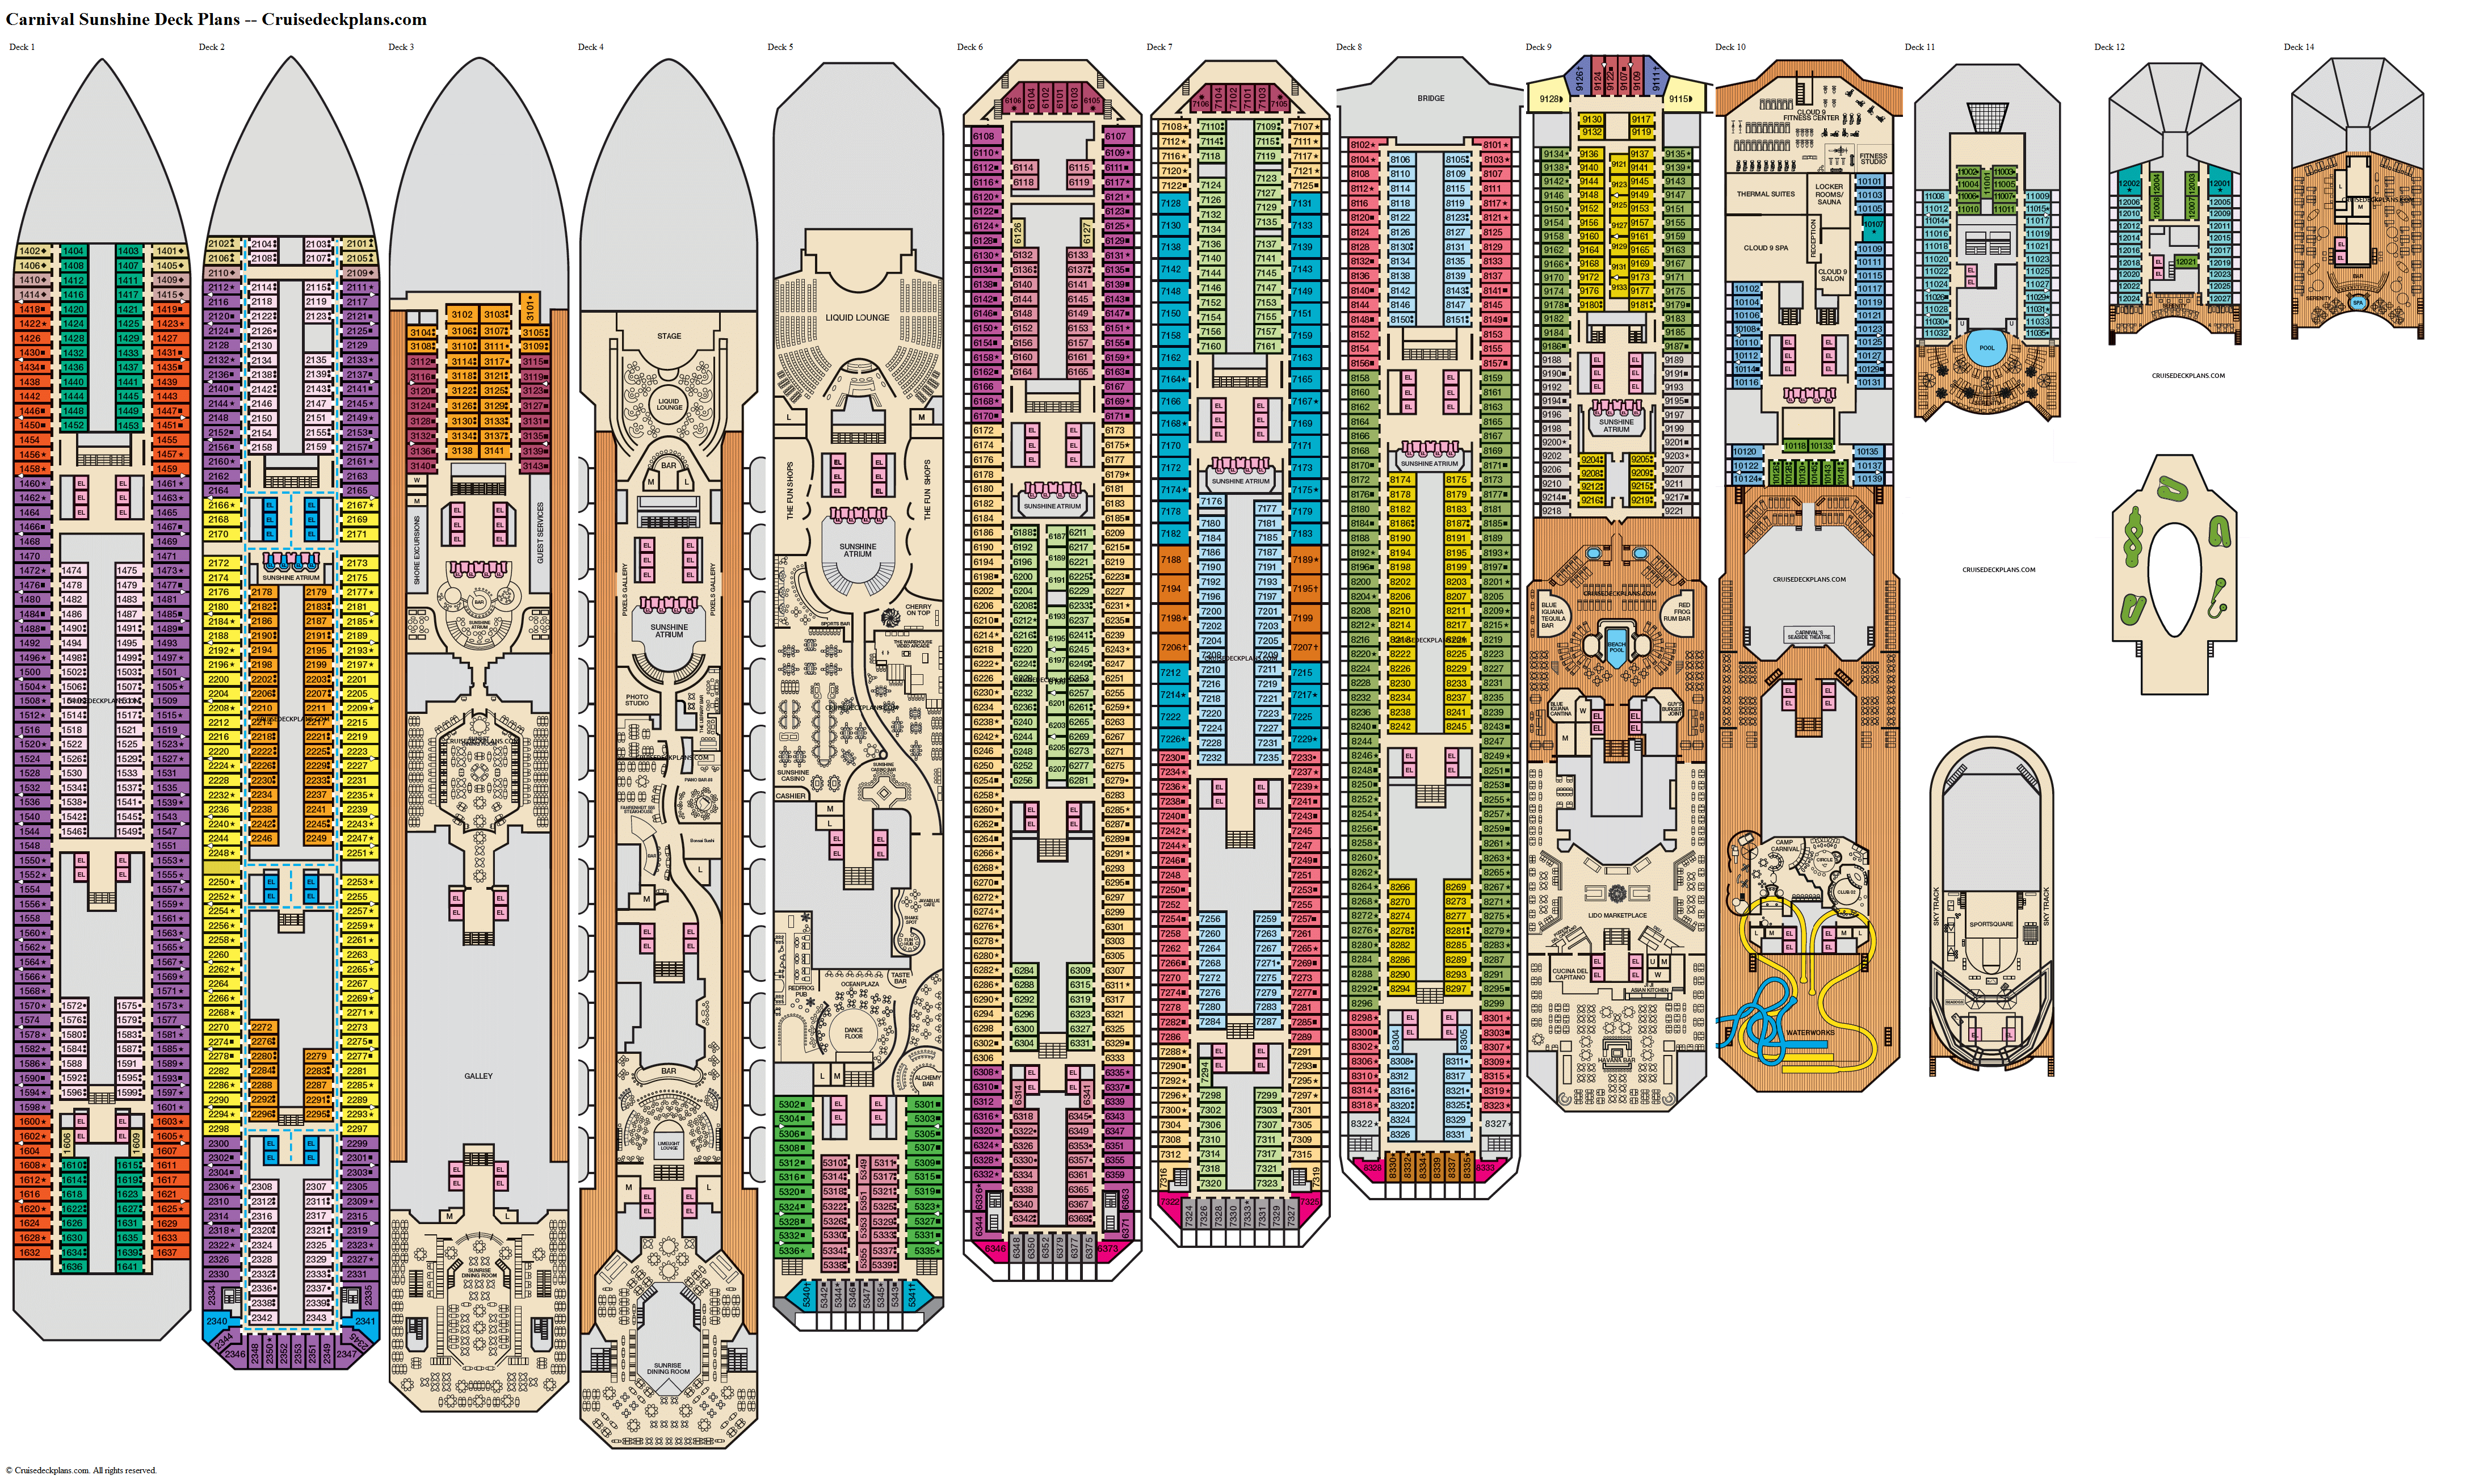 carnival cruise deck plans